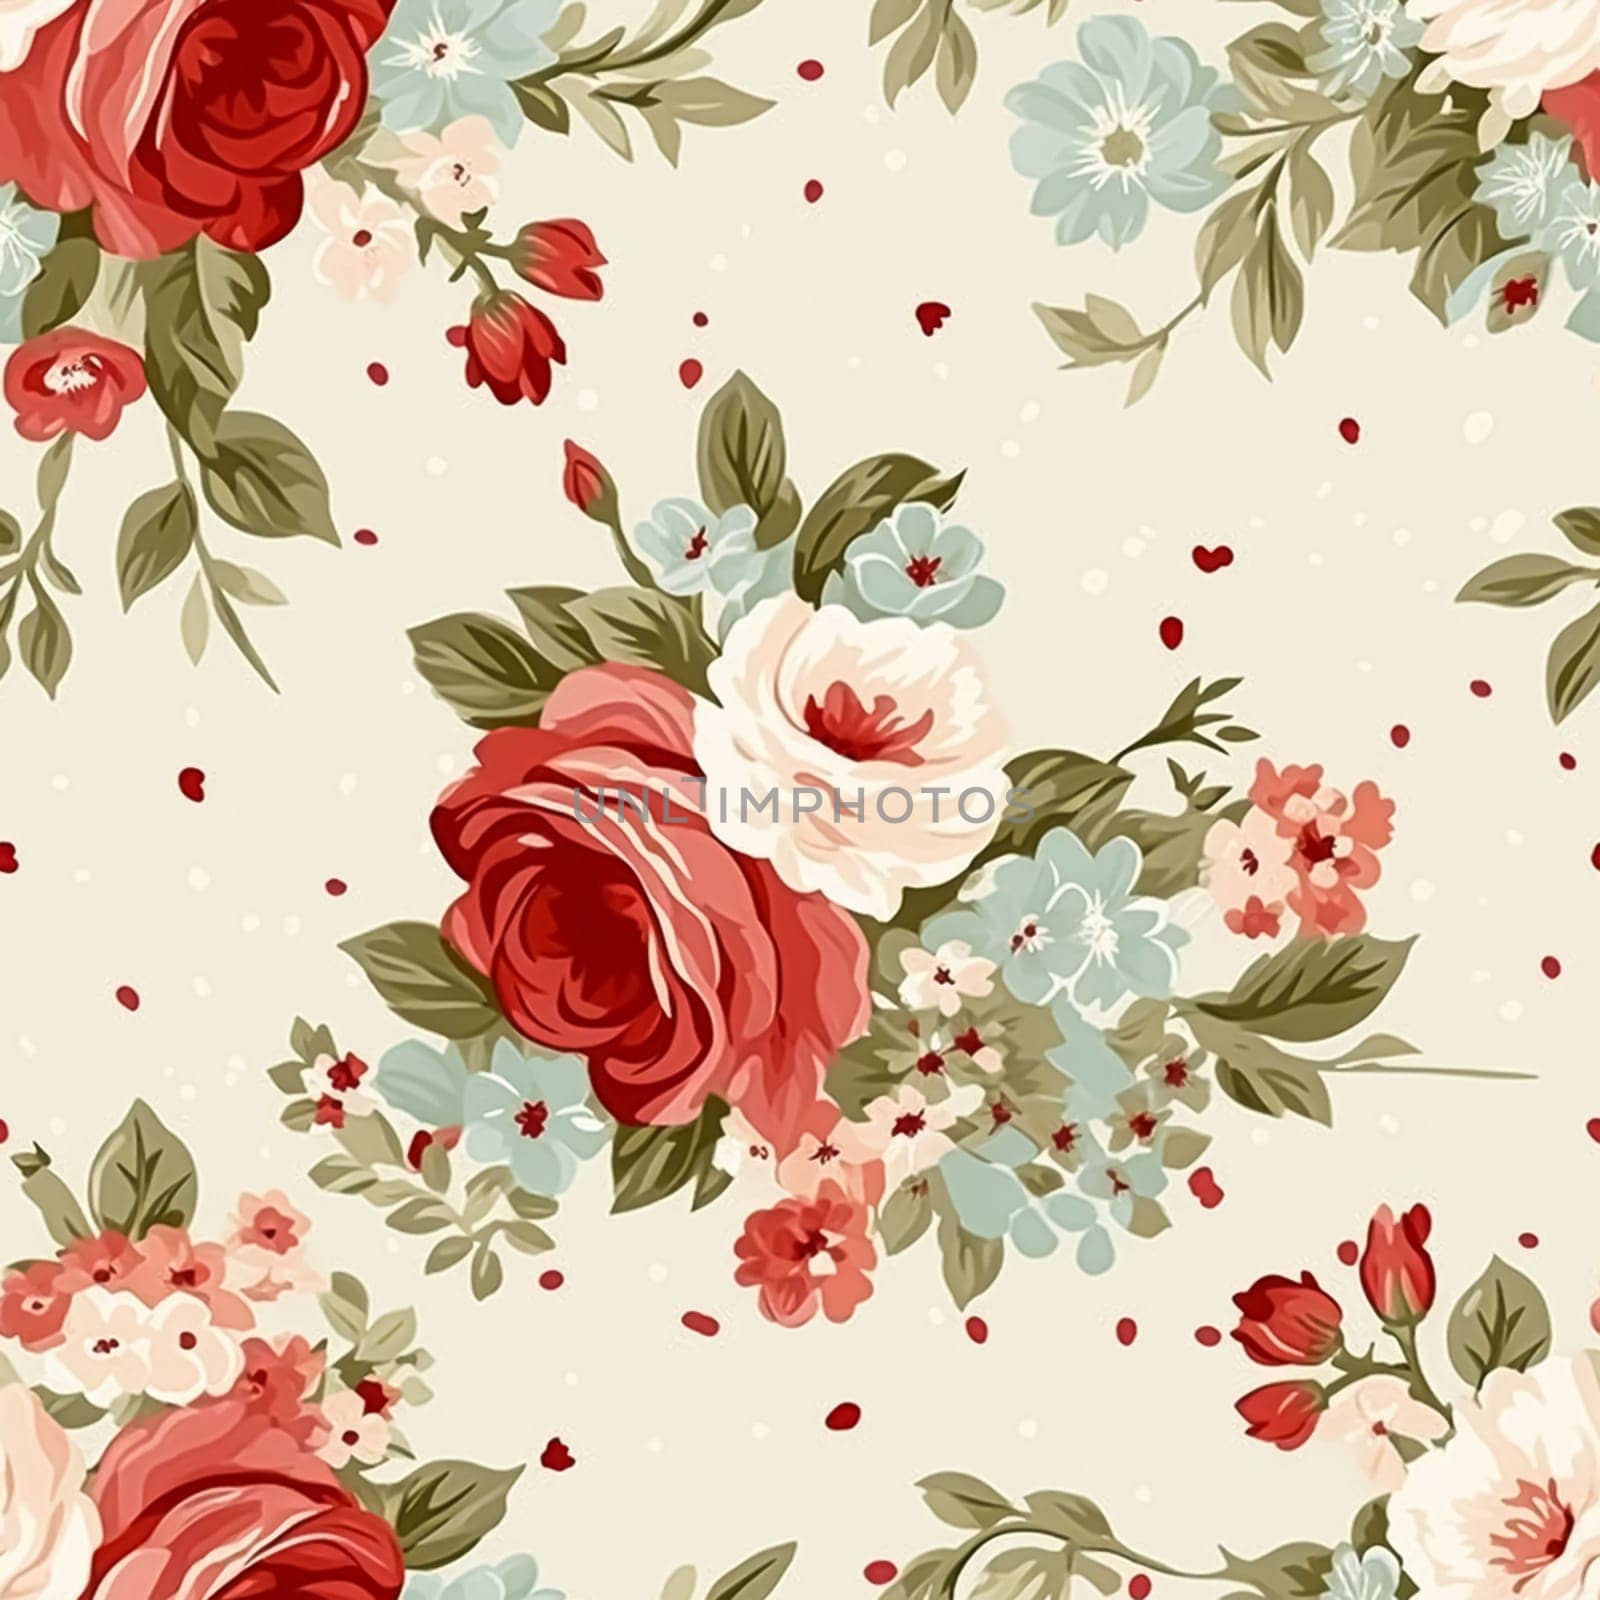 Seamless pattern, tileable floral country holiday print with roses, dots and flowers for wallpaper, wrapping paper, scrapbook, fabric and polka dot roses product design by Anneleven